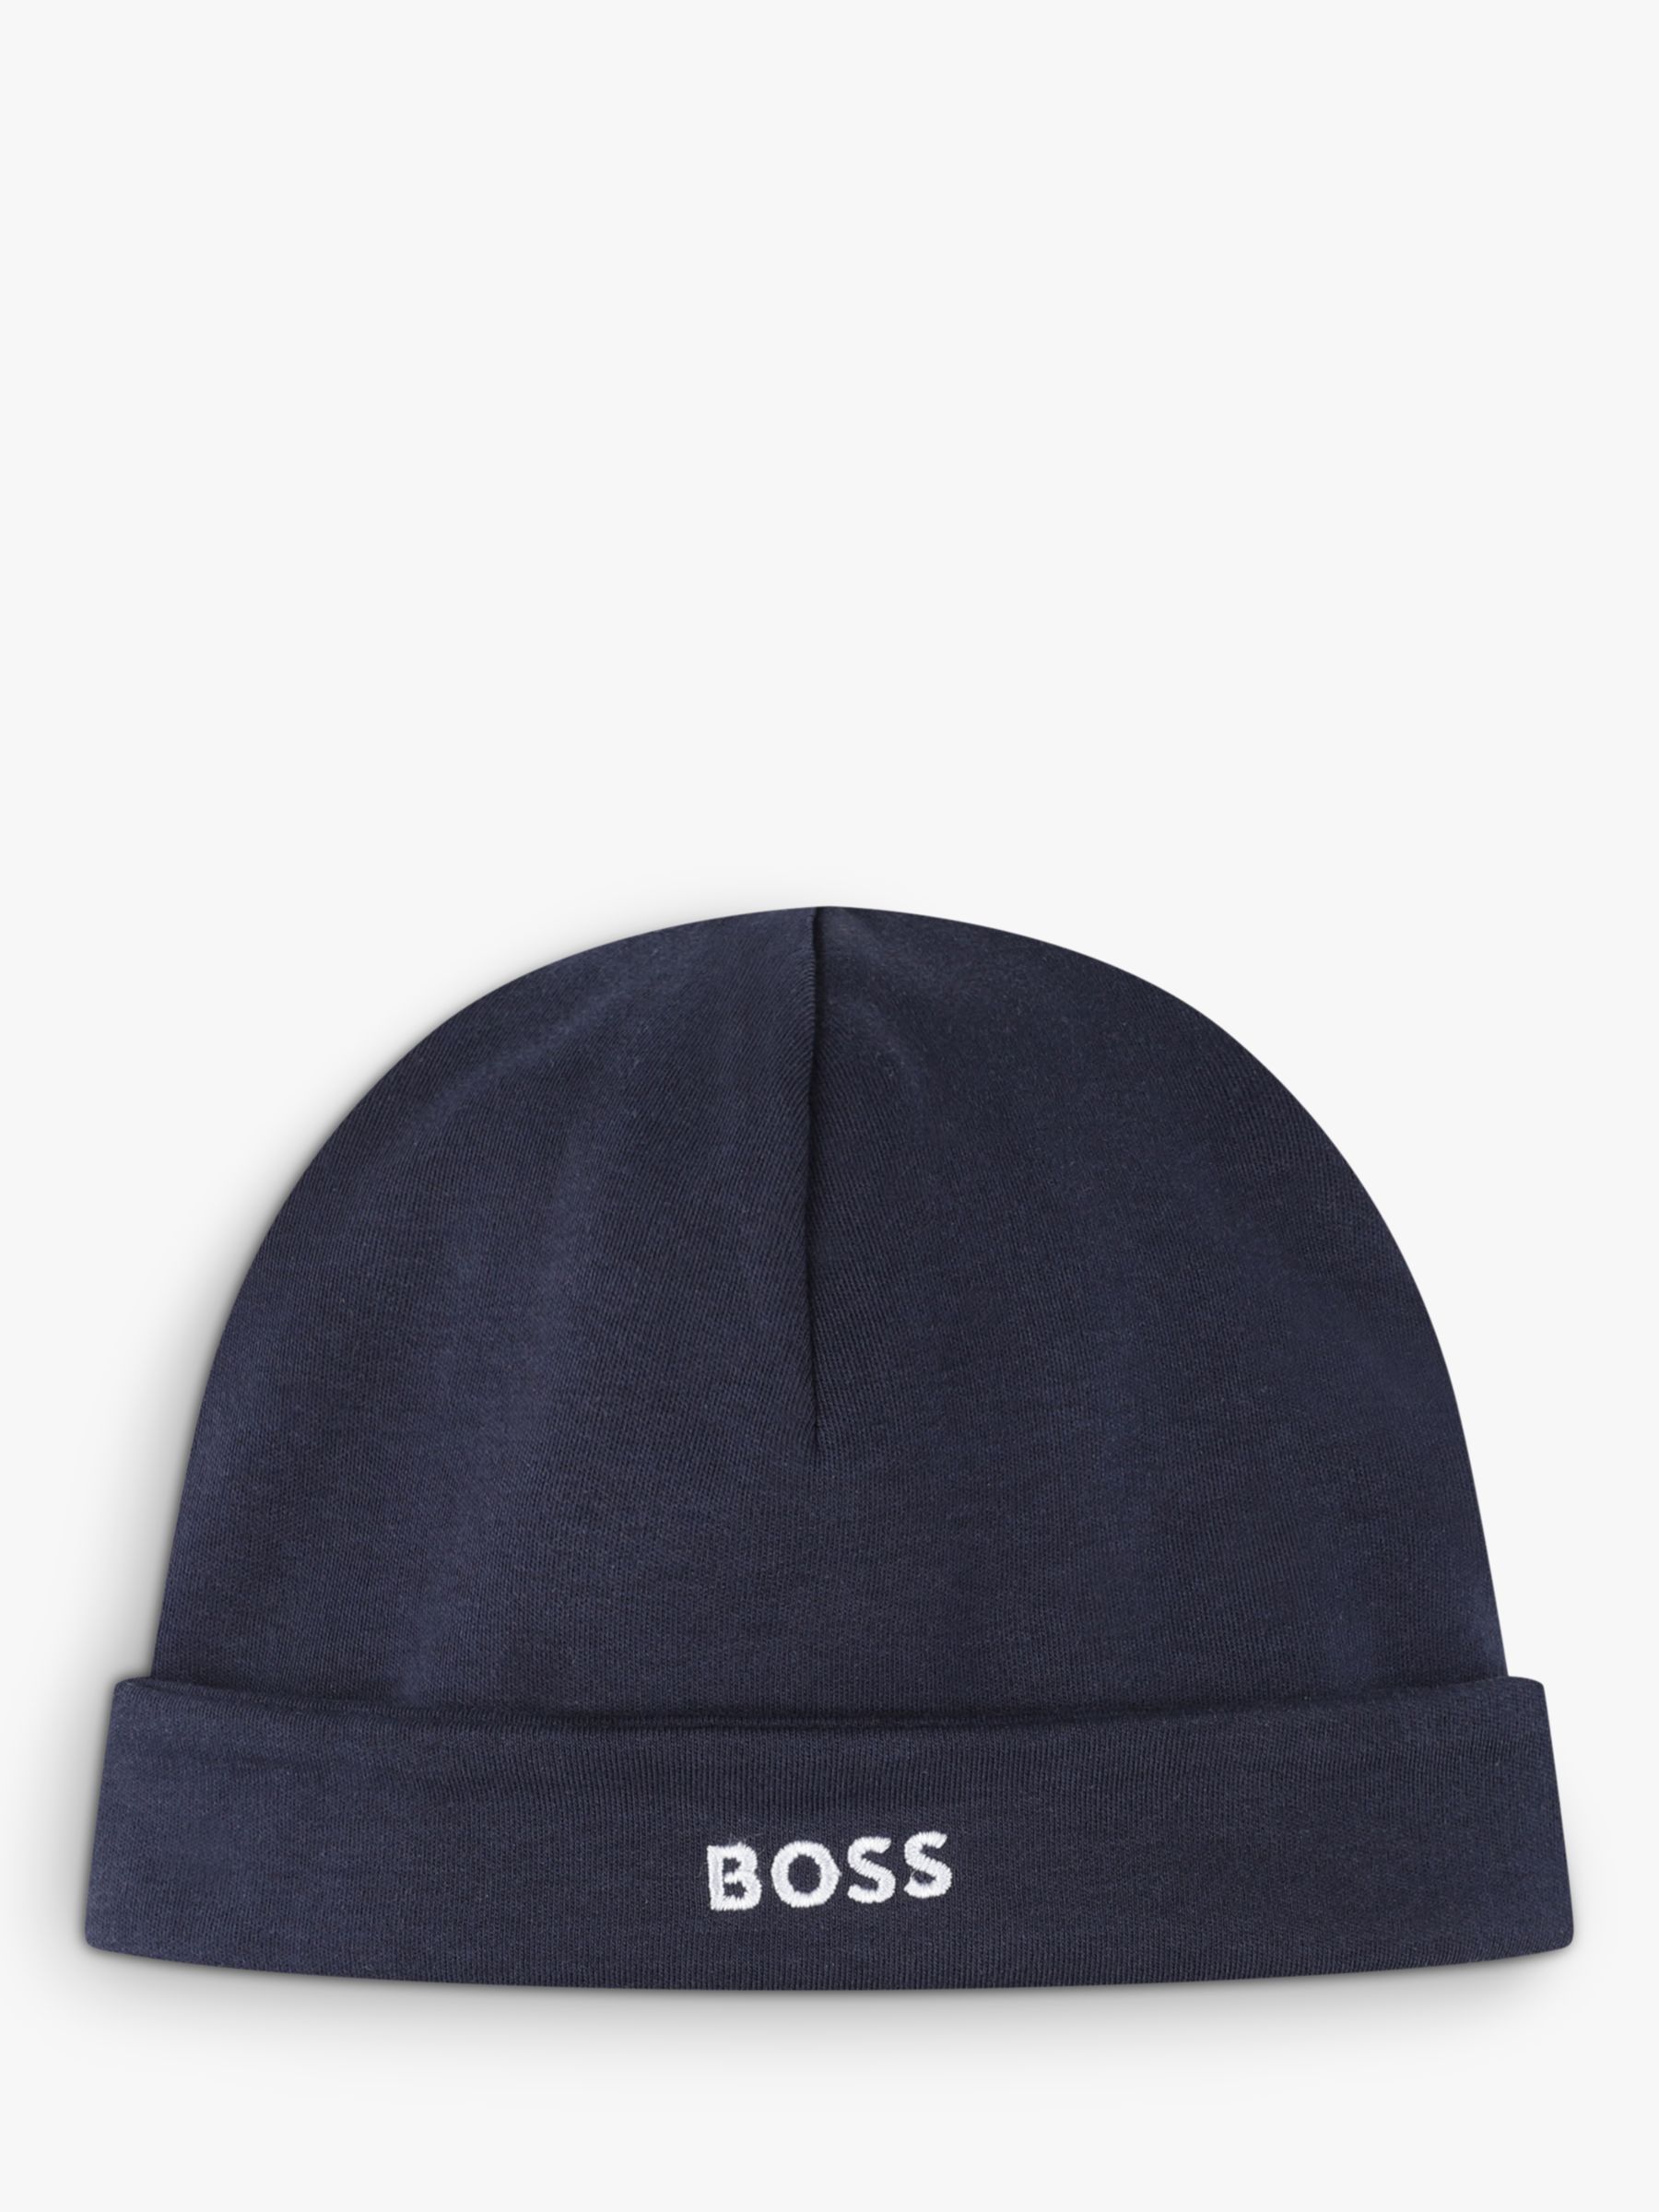 BOSS Baby Logo Pull On Hat, Navy, 1 months